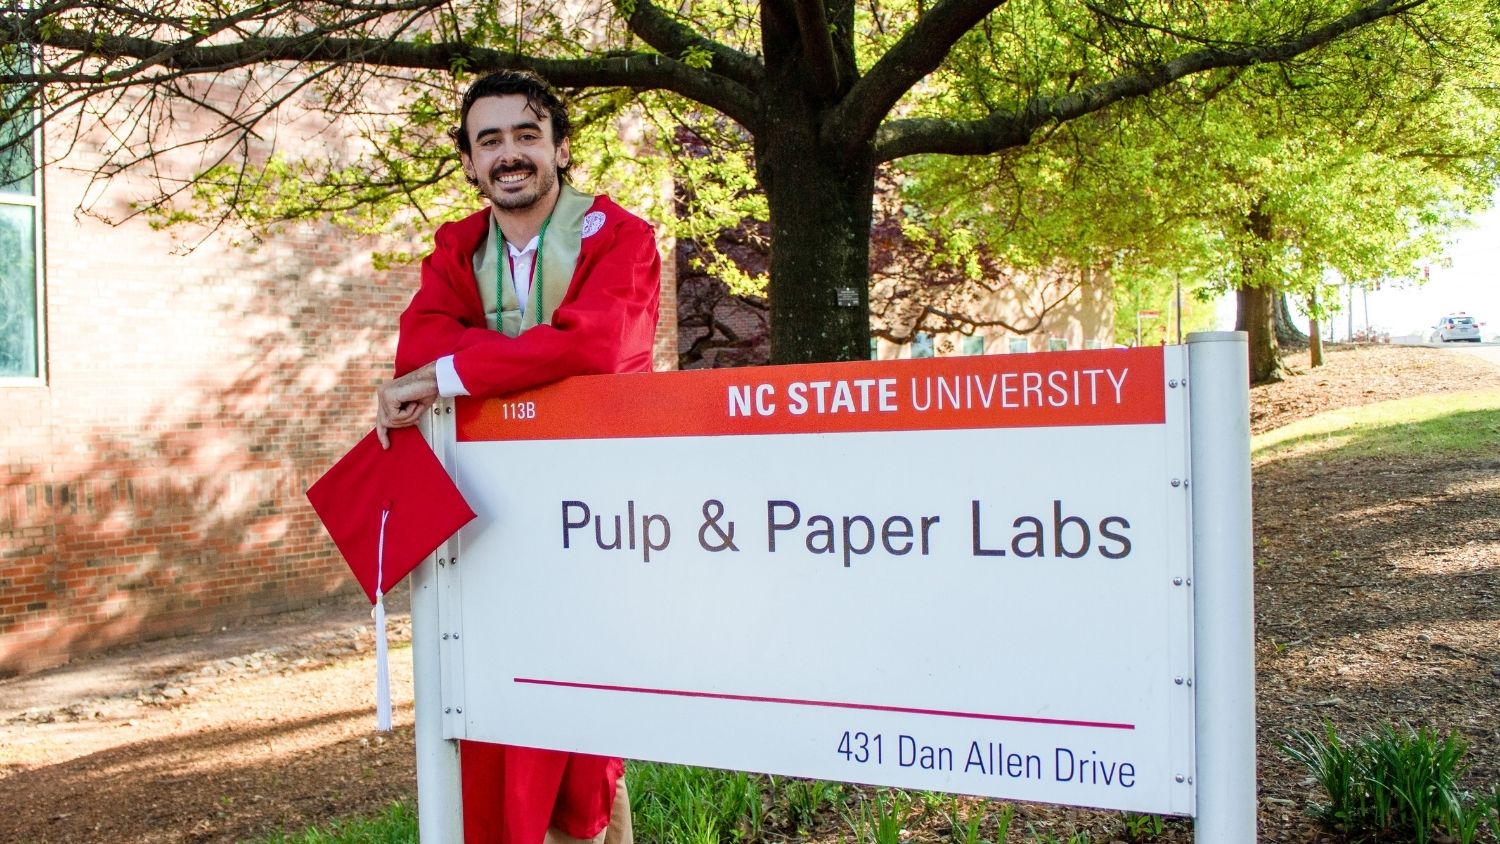 Brendan Tumpey, graduate of the College of Natural Resources, leans across a sign for the pulp and paper labs.